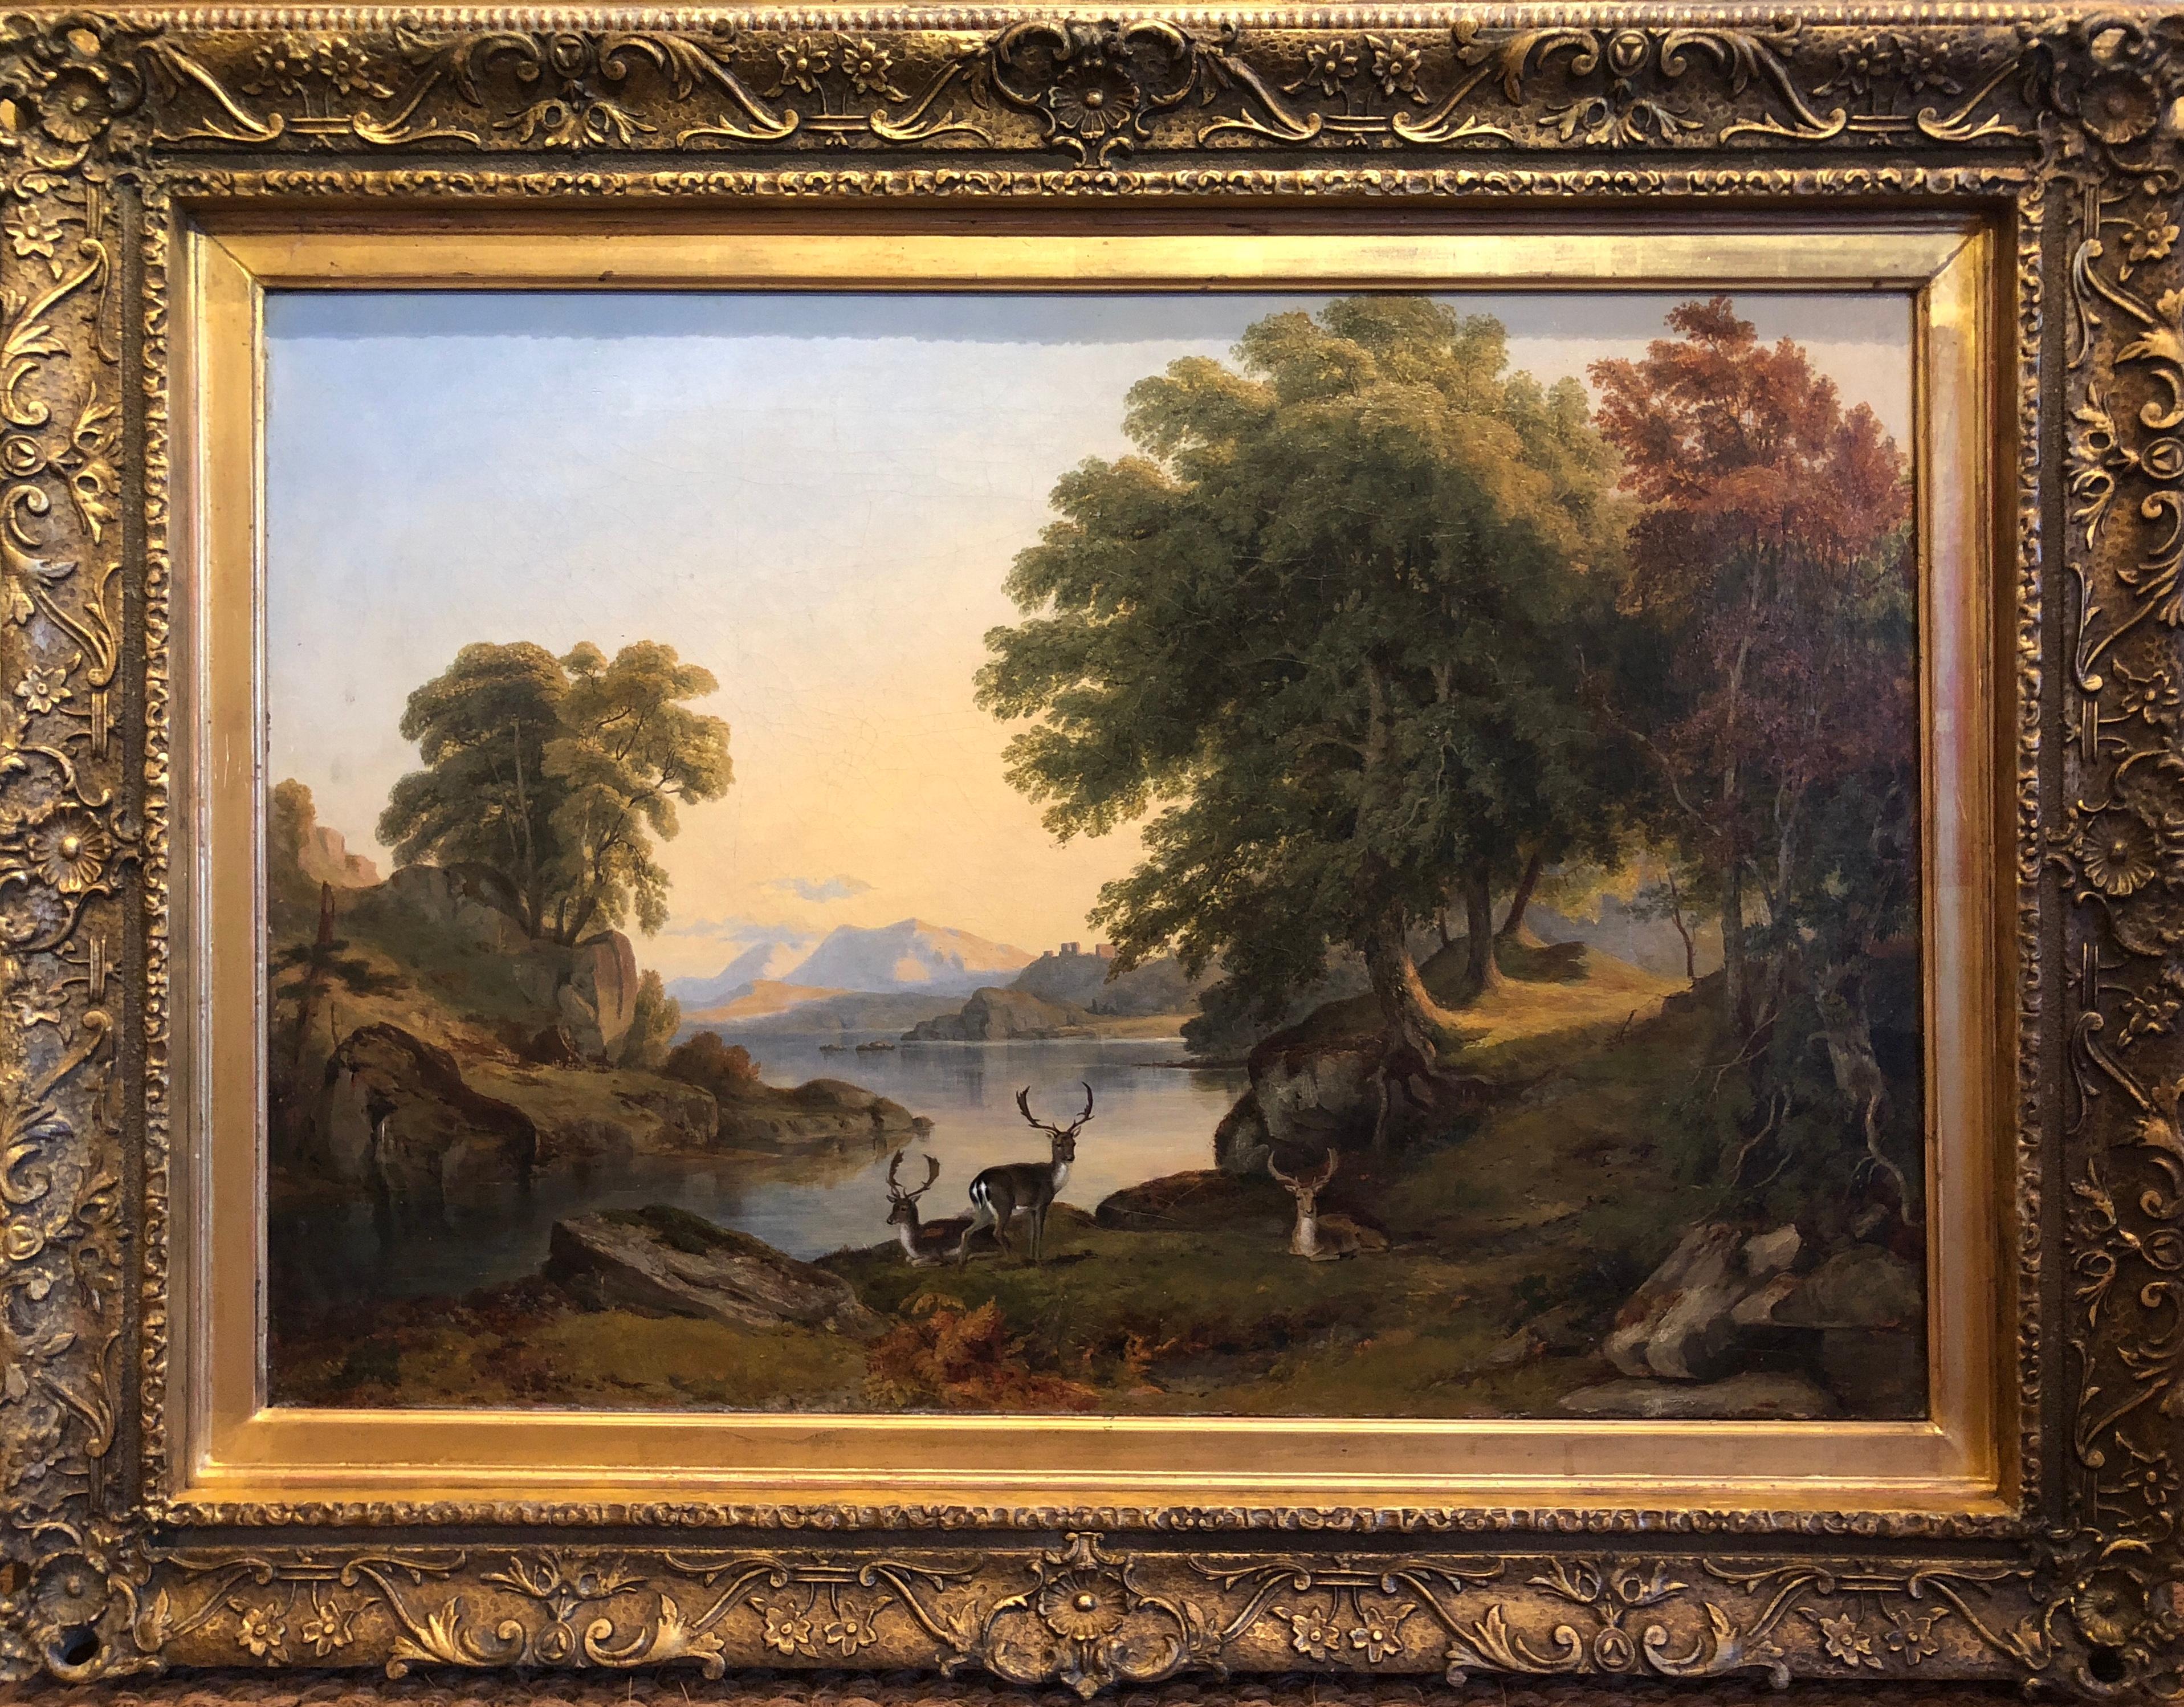 19th Century Landscape Oil Painting - Deer by the Banks of a Lake